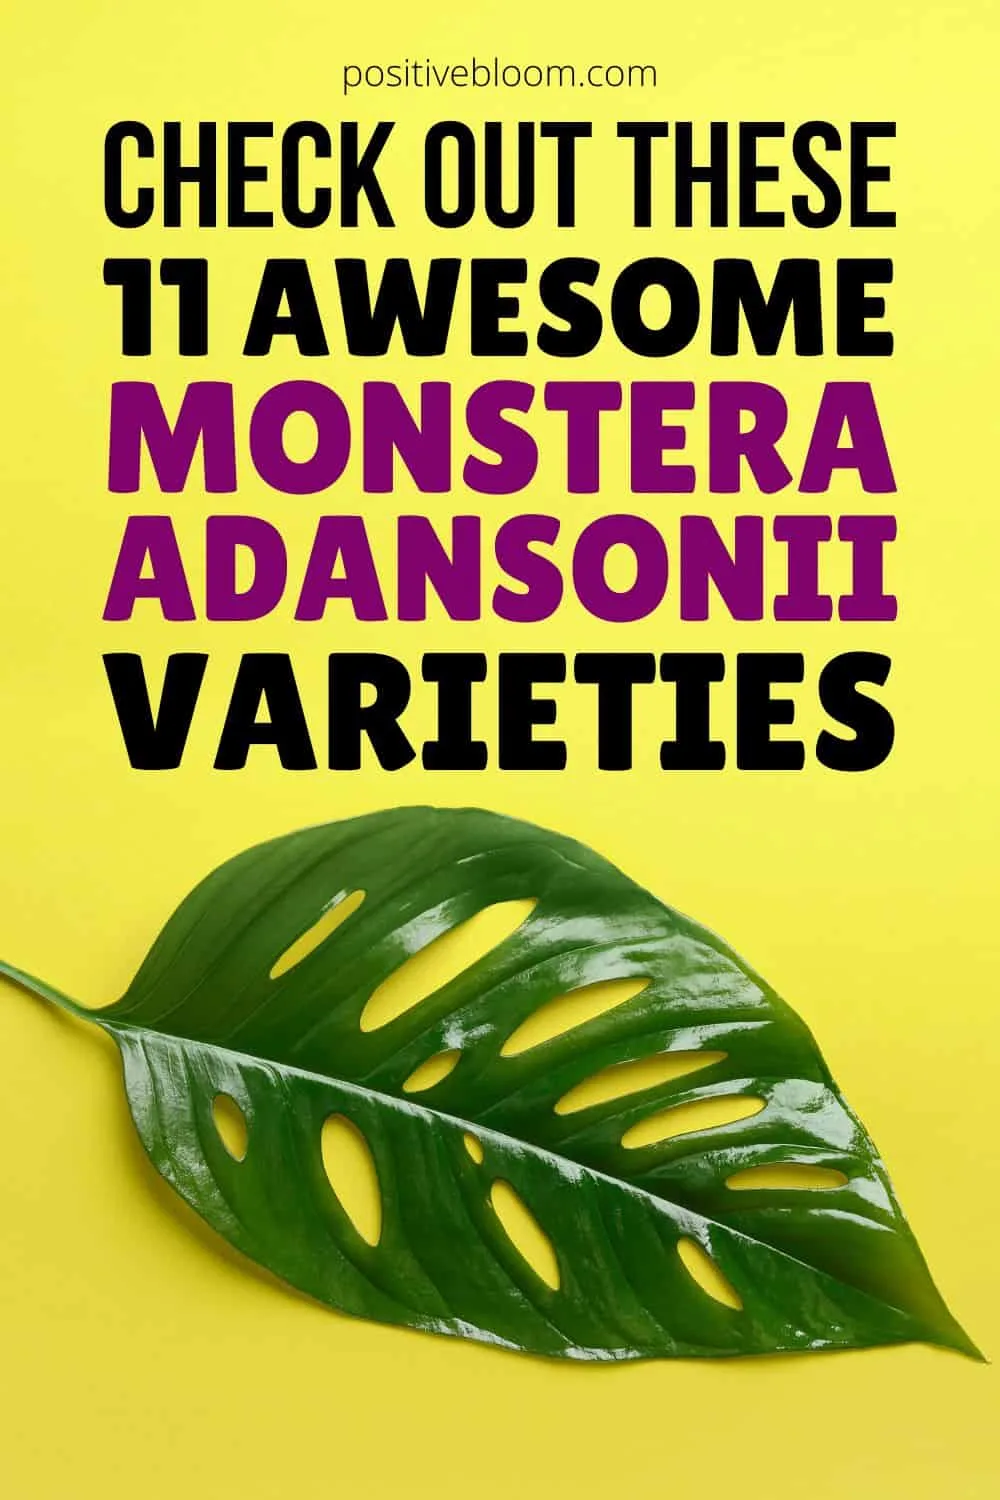 Check Out These 11 Awesome Monstera Adansonii Varieties Pinterest